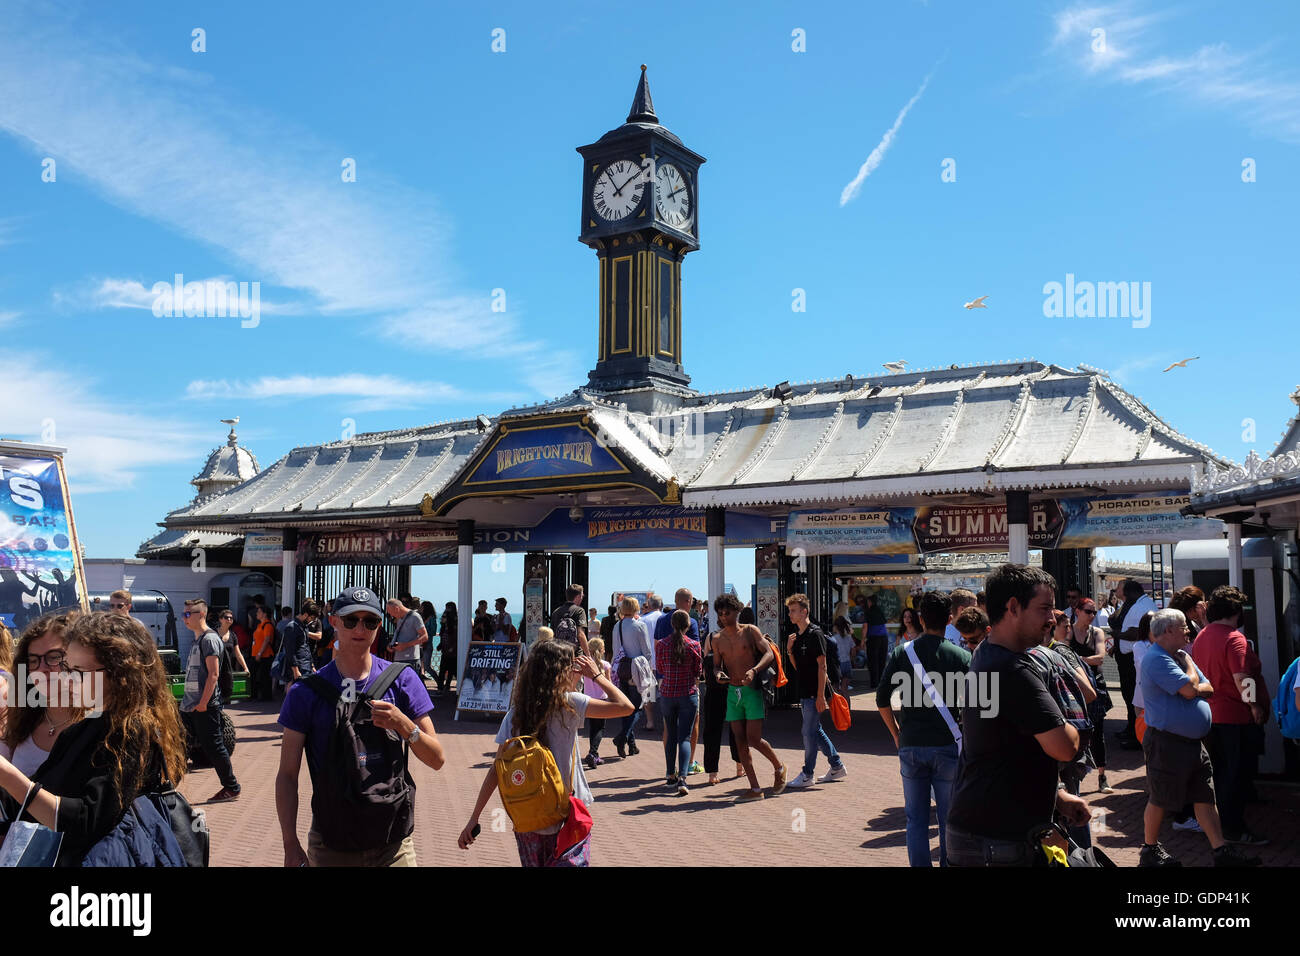 The entrance to Palace Pier in Brighton, England. Stock Photo